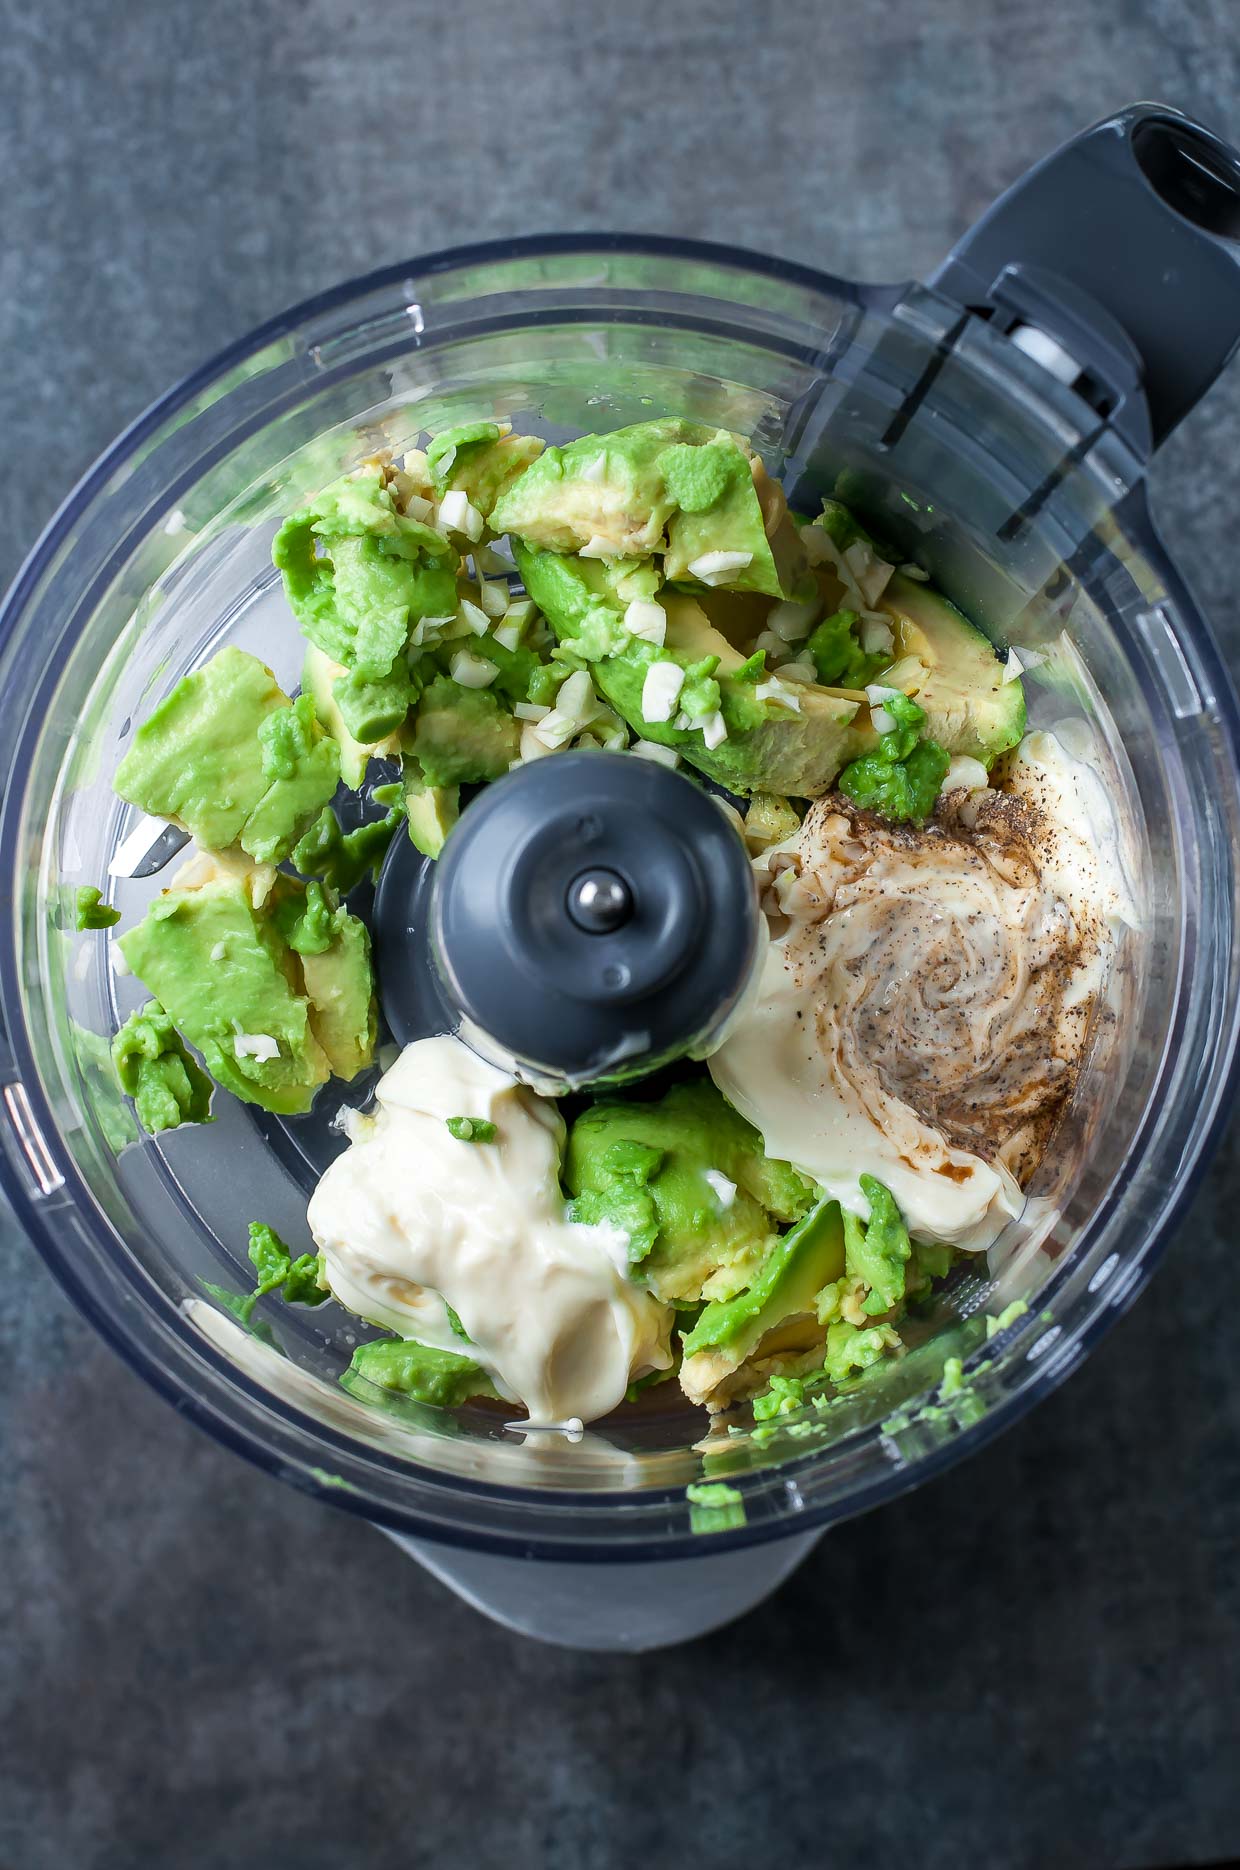 Featuring a tasty medley of broccoli, cauliflower, corn, and chickpeas, this chopped cauliflower broccoli salad with creamy avocado dressing is ready to rock your portable lunch game. Perfect for parties, potlucks, picnics, and a tasty on-the-go lunch!